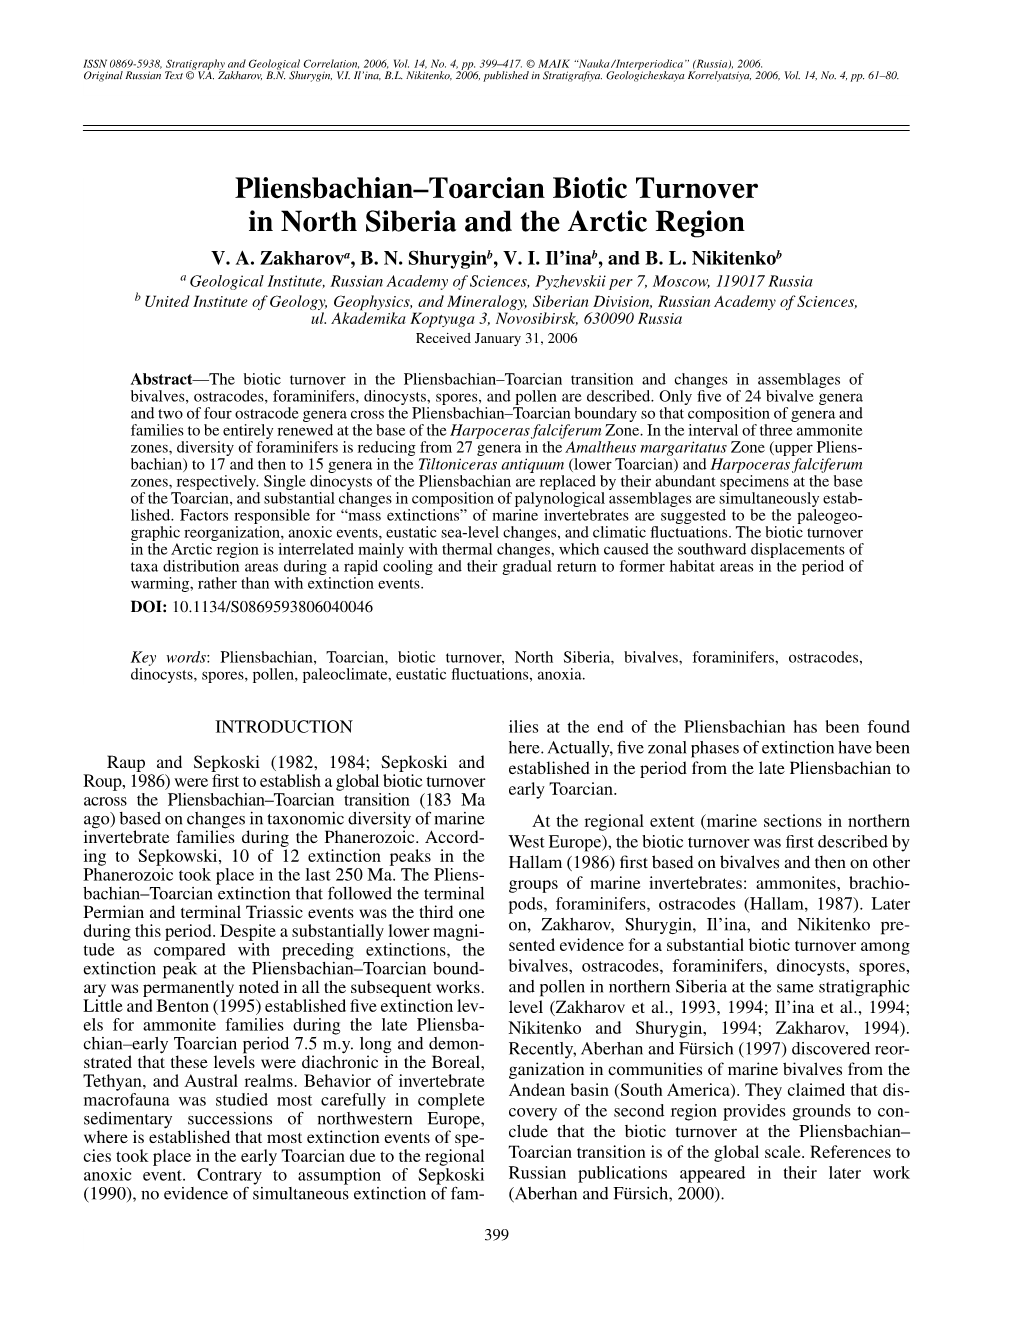 Pliensbachian-Toarcian Biotic Turnover in North Siberia and the Arctic Region